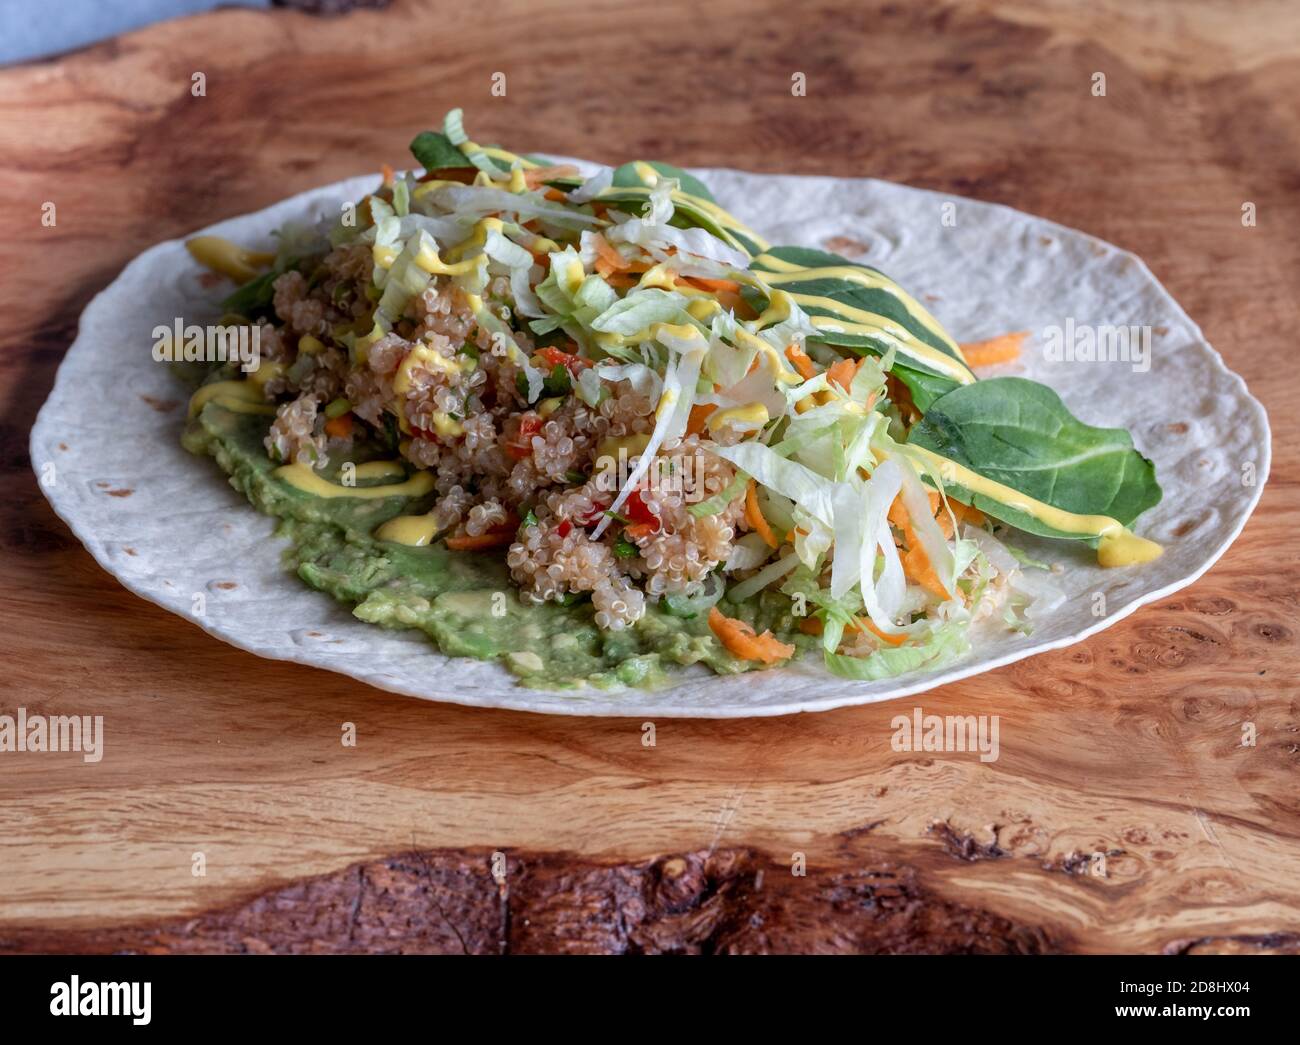 Open wrap with guacamole, quinoa, colourful salad and sauce over. Stock Photo